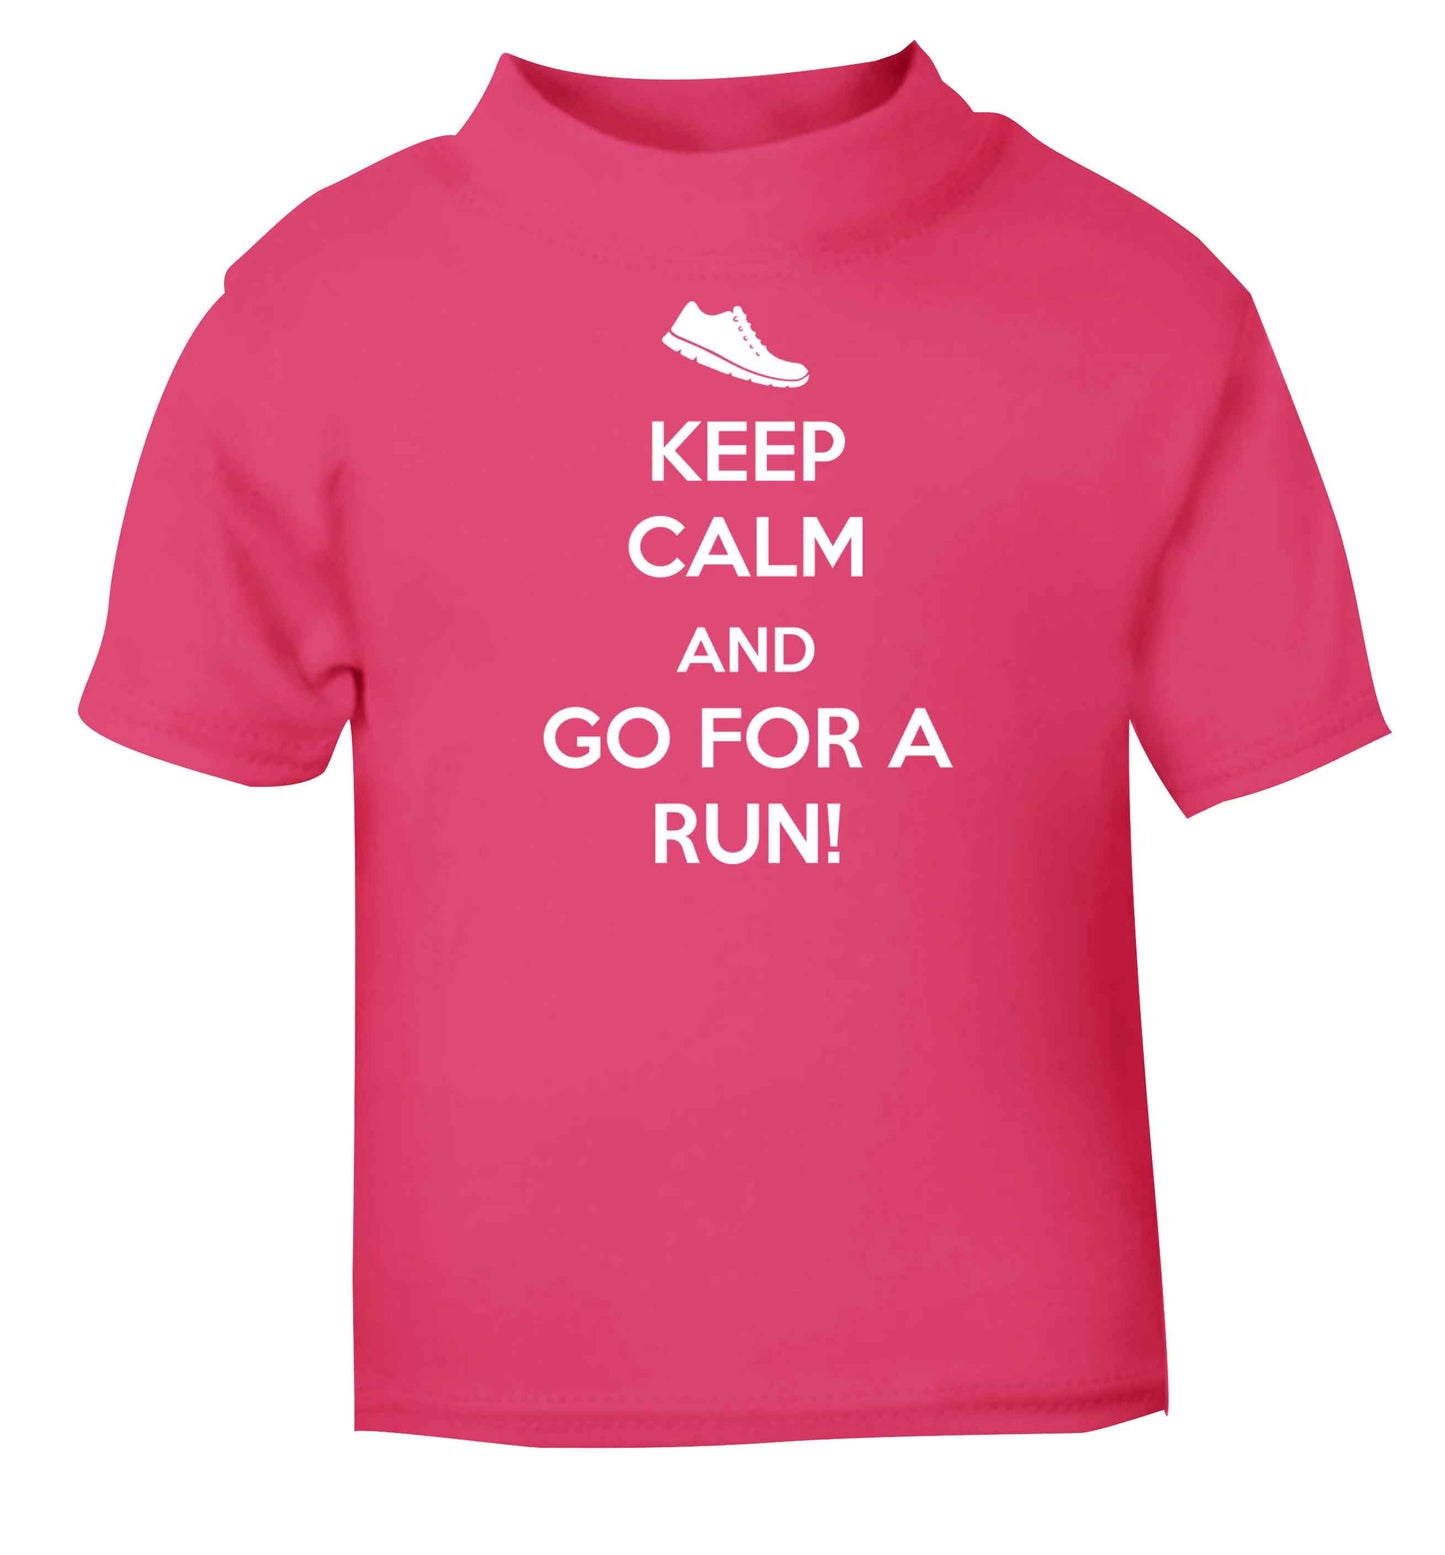 Keep calm and go for a run pink baby toddler Tshirt 2 Years